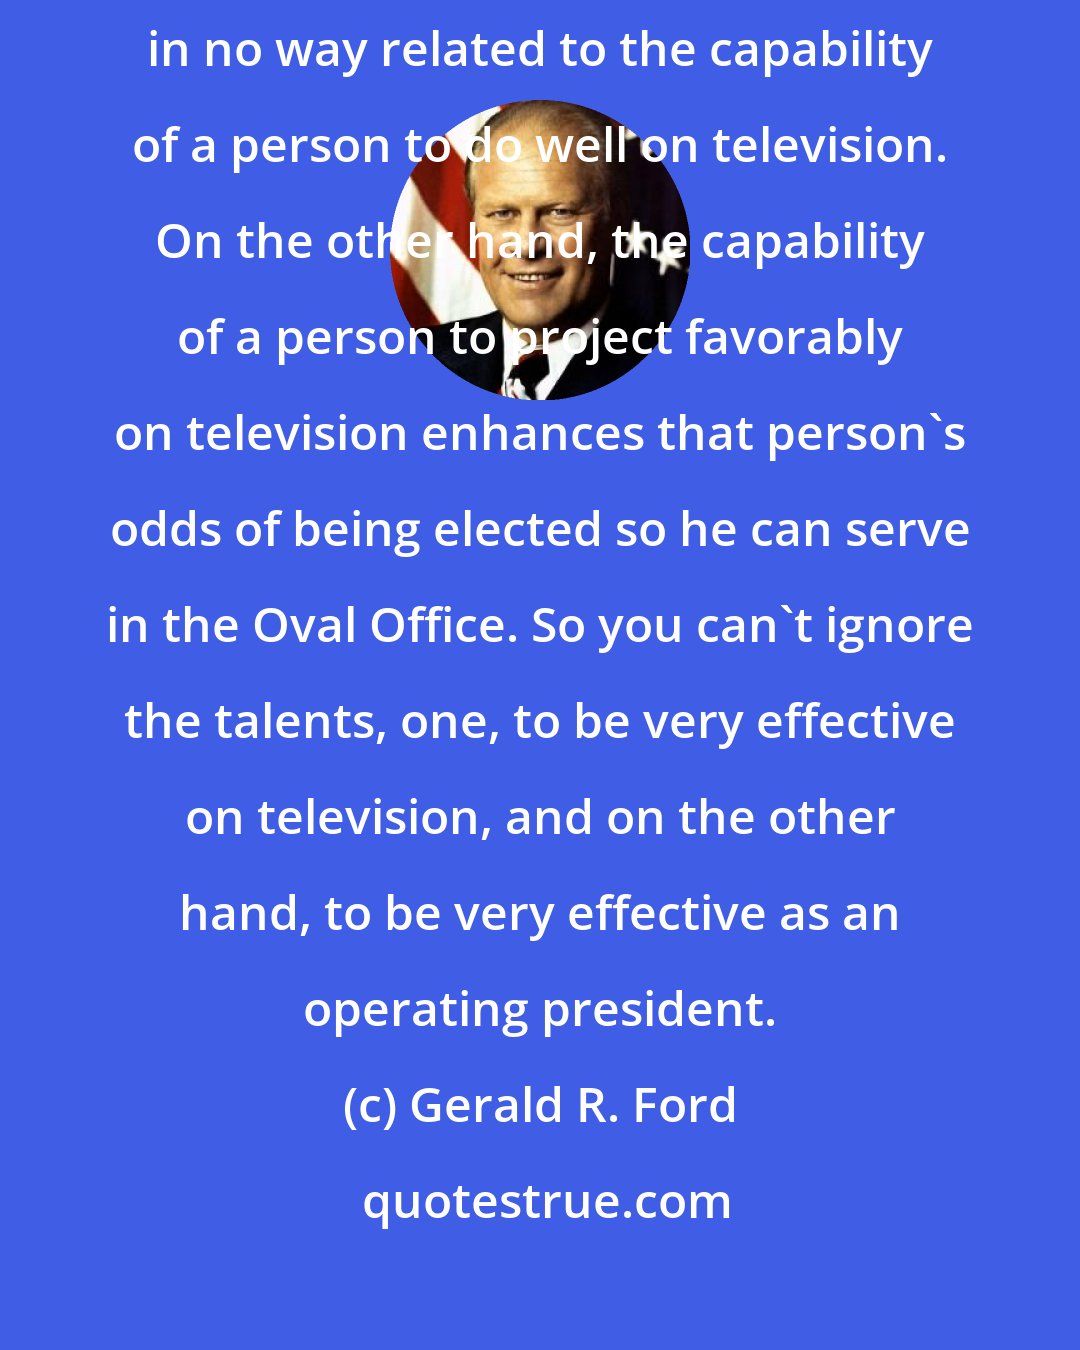 Gerald R. Ford: The tough decisions that a president has to make in the Oval Office are in no way related to the capability of a person to do well on television. On the other hand, the capability of a person to project favorably on television enhances that person's odds of being elected so he can serve in the Oval Office. So you can't ignore the talents, one, to be very effective on television, and on the other hand, to be very effective as an operating president.